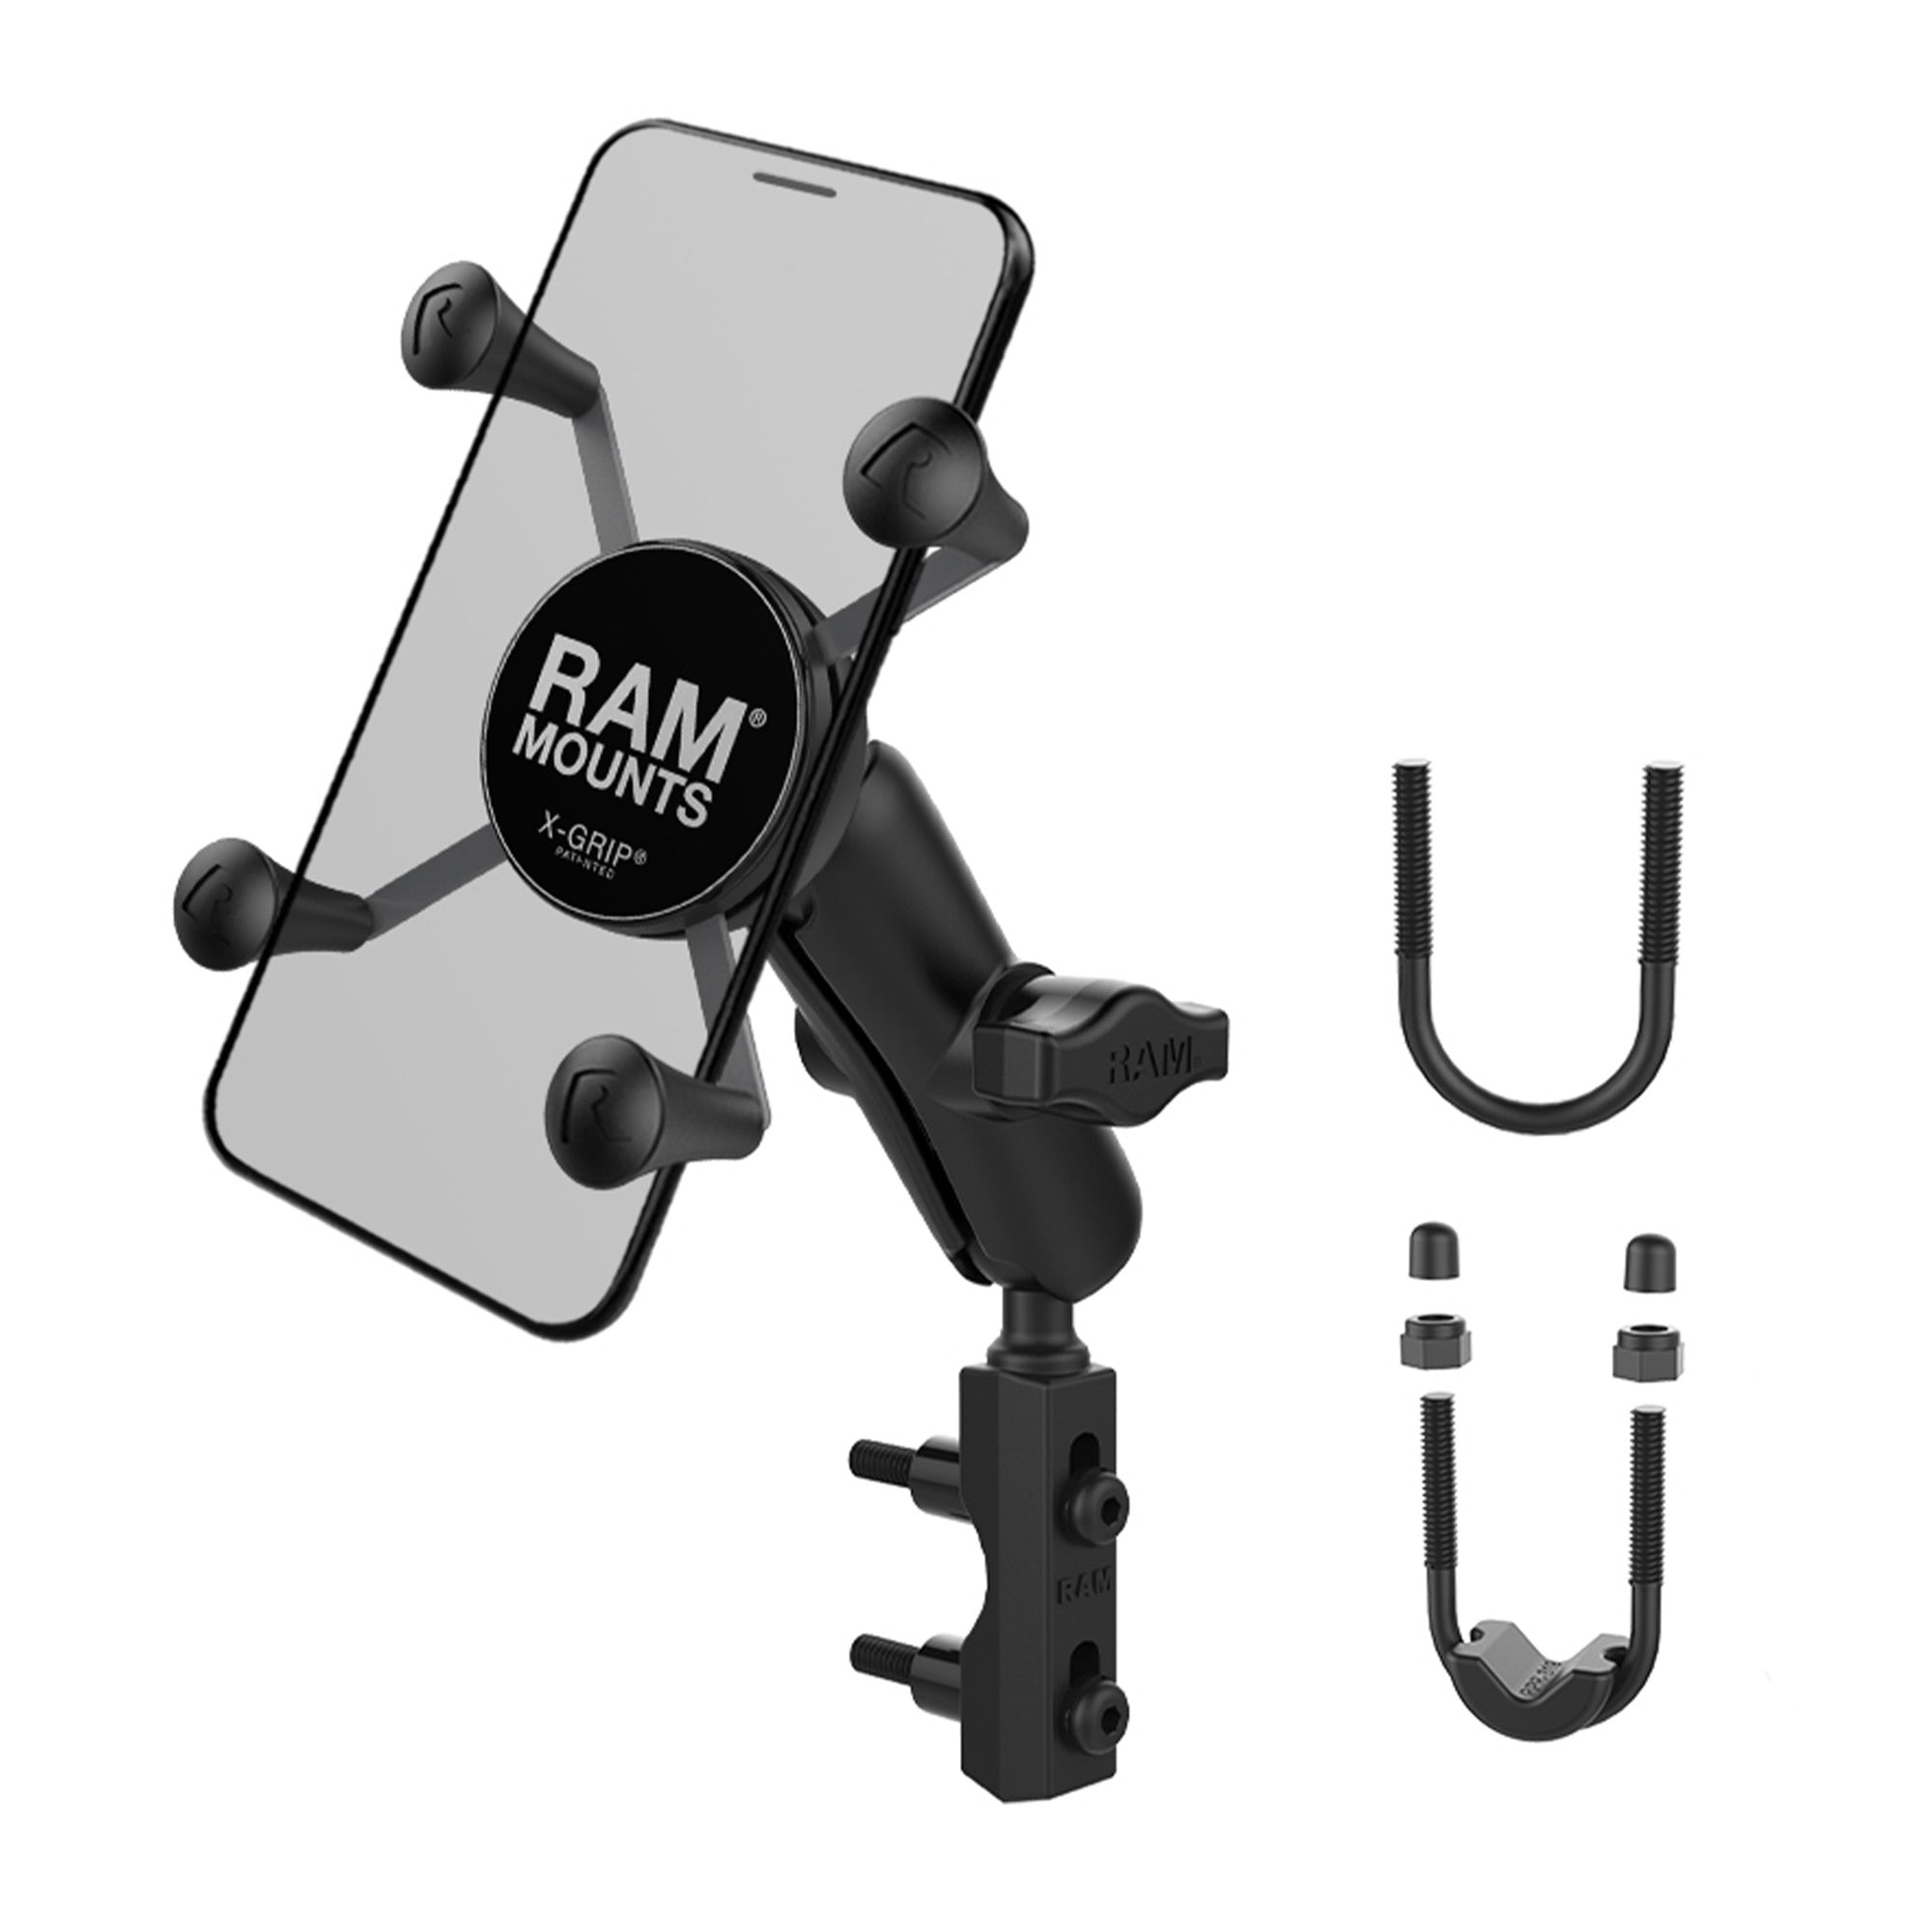 RAM X-Grip Universal Phone Mount with Motorcycle Brake/Clutch Reservoir Base - Non-Retail Packaging